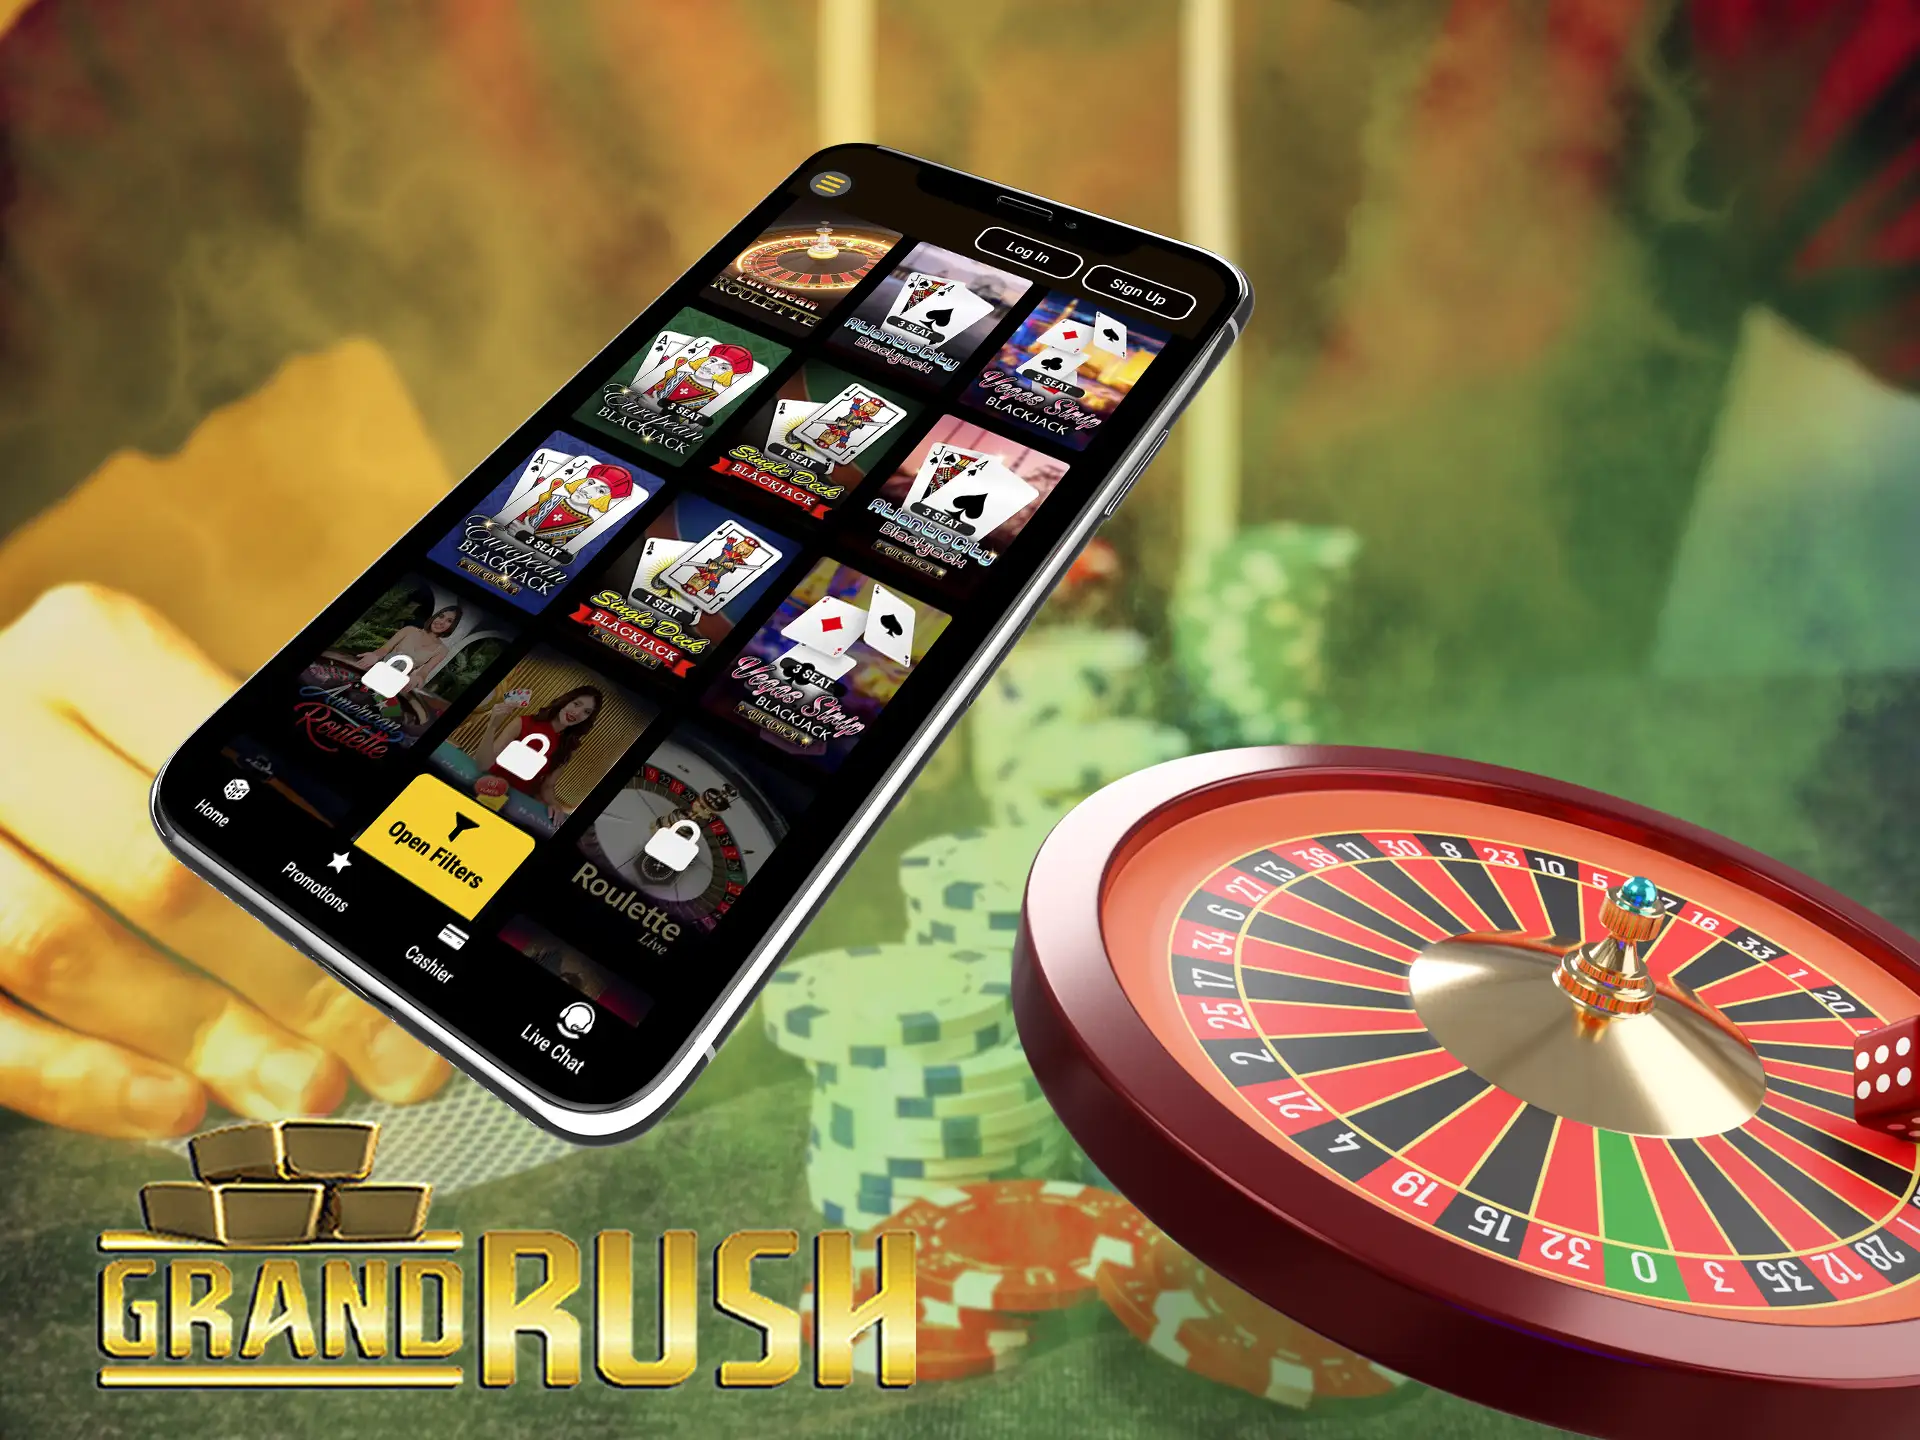 Grand Rush offers best selection of Roulette games.